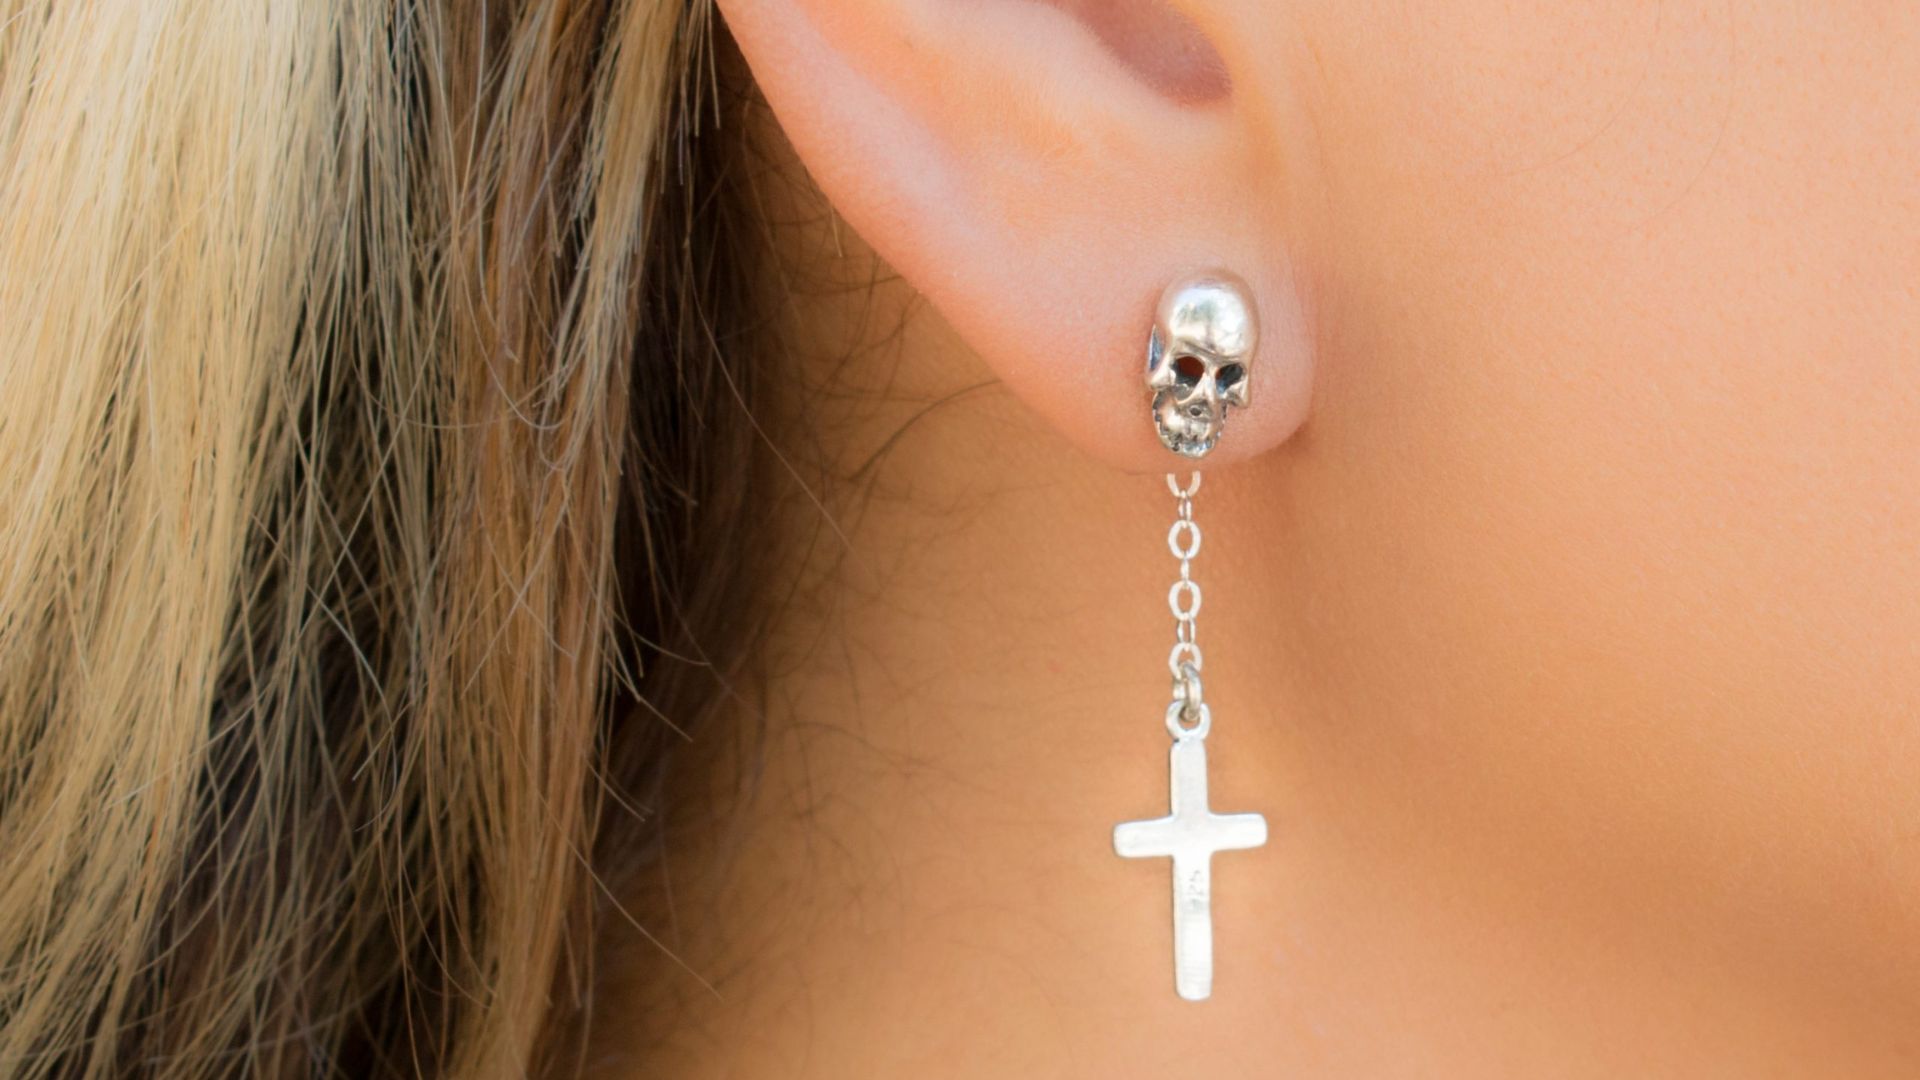 Gothic Earrings - A Unique And Bold Addition To Your Jewelry Collection